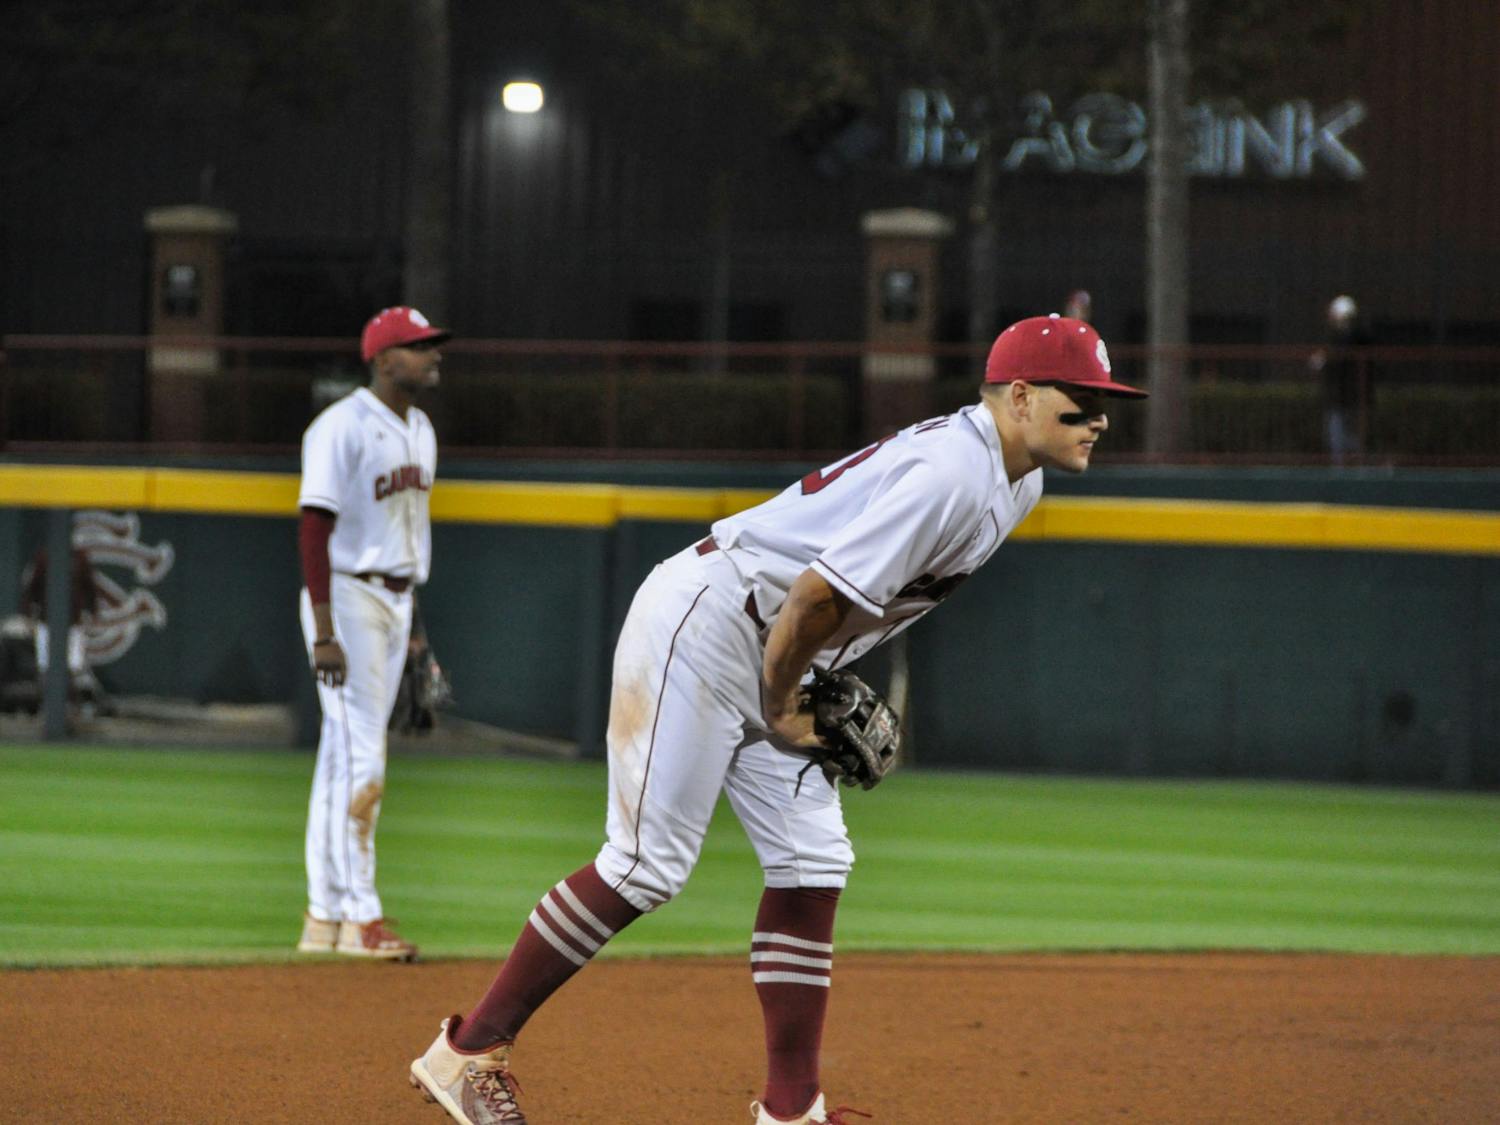 Senior infielder Kevin Madden and freshman infielder and right-handed pitcher Michael Braswell are ready for action during a game against Presbyterian on March 29, 2022. South Carolina lost 9-6. &nbsp;